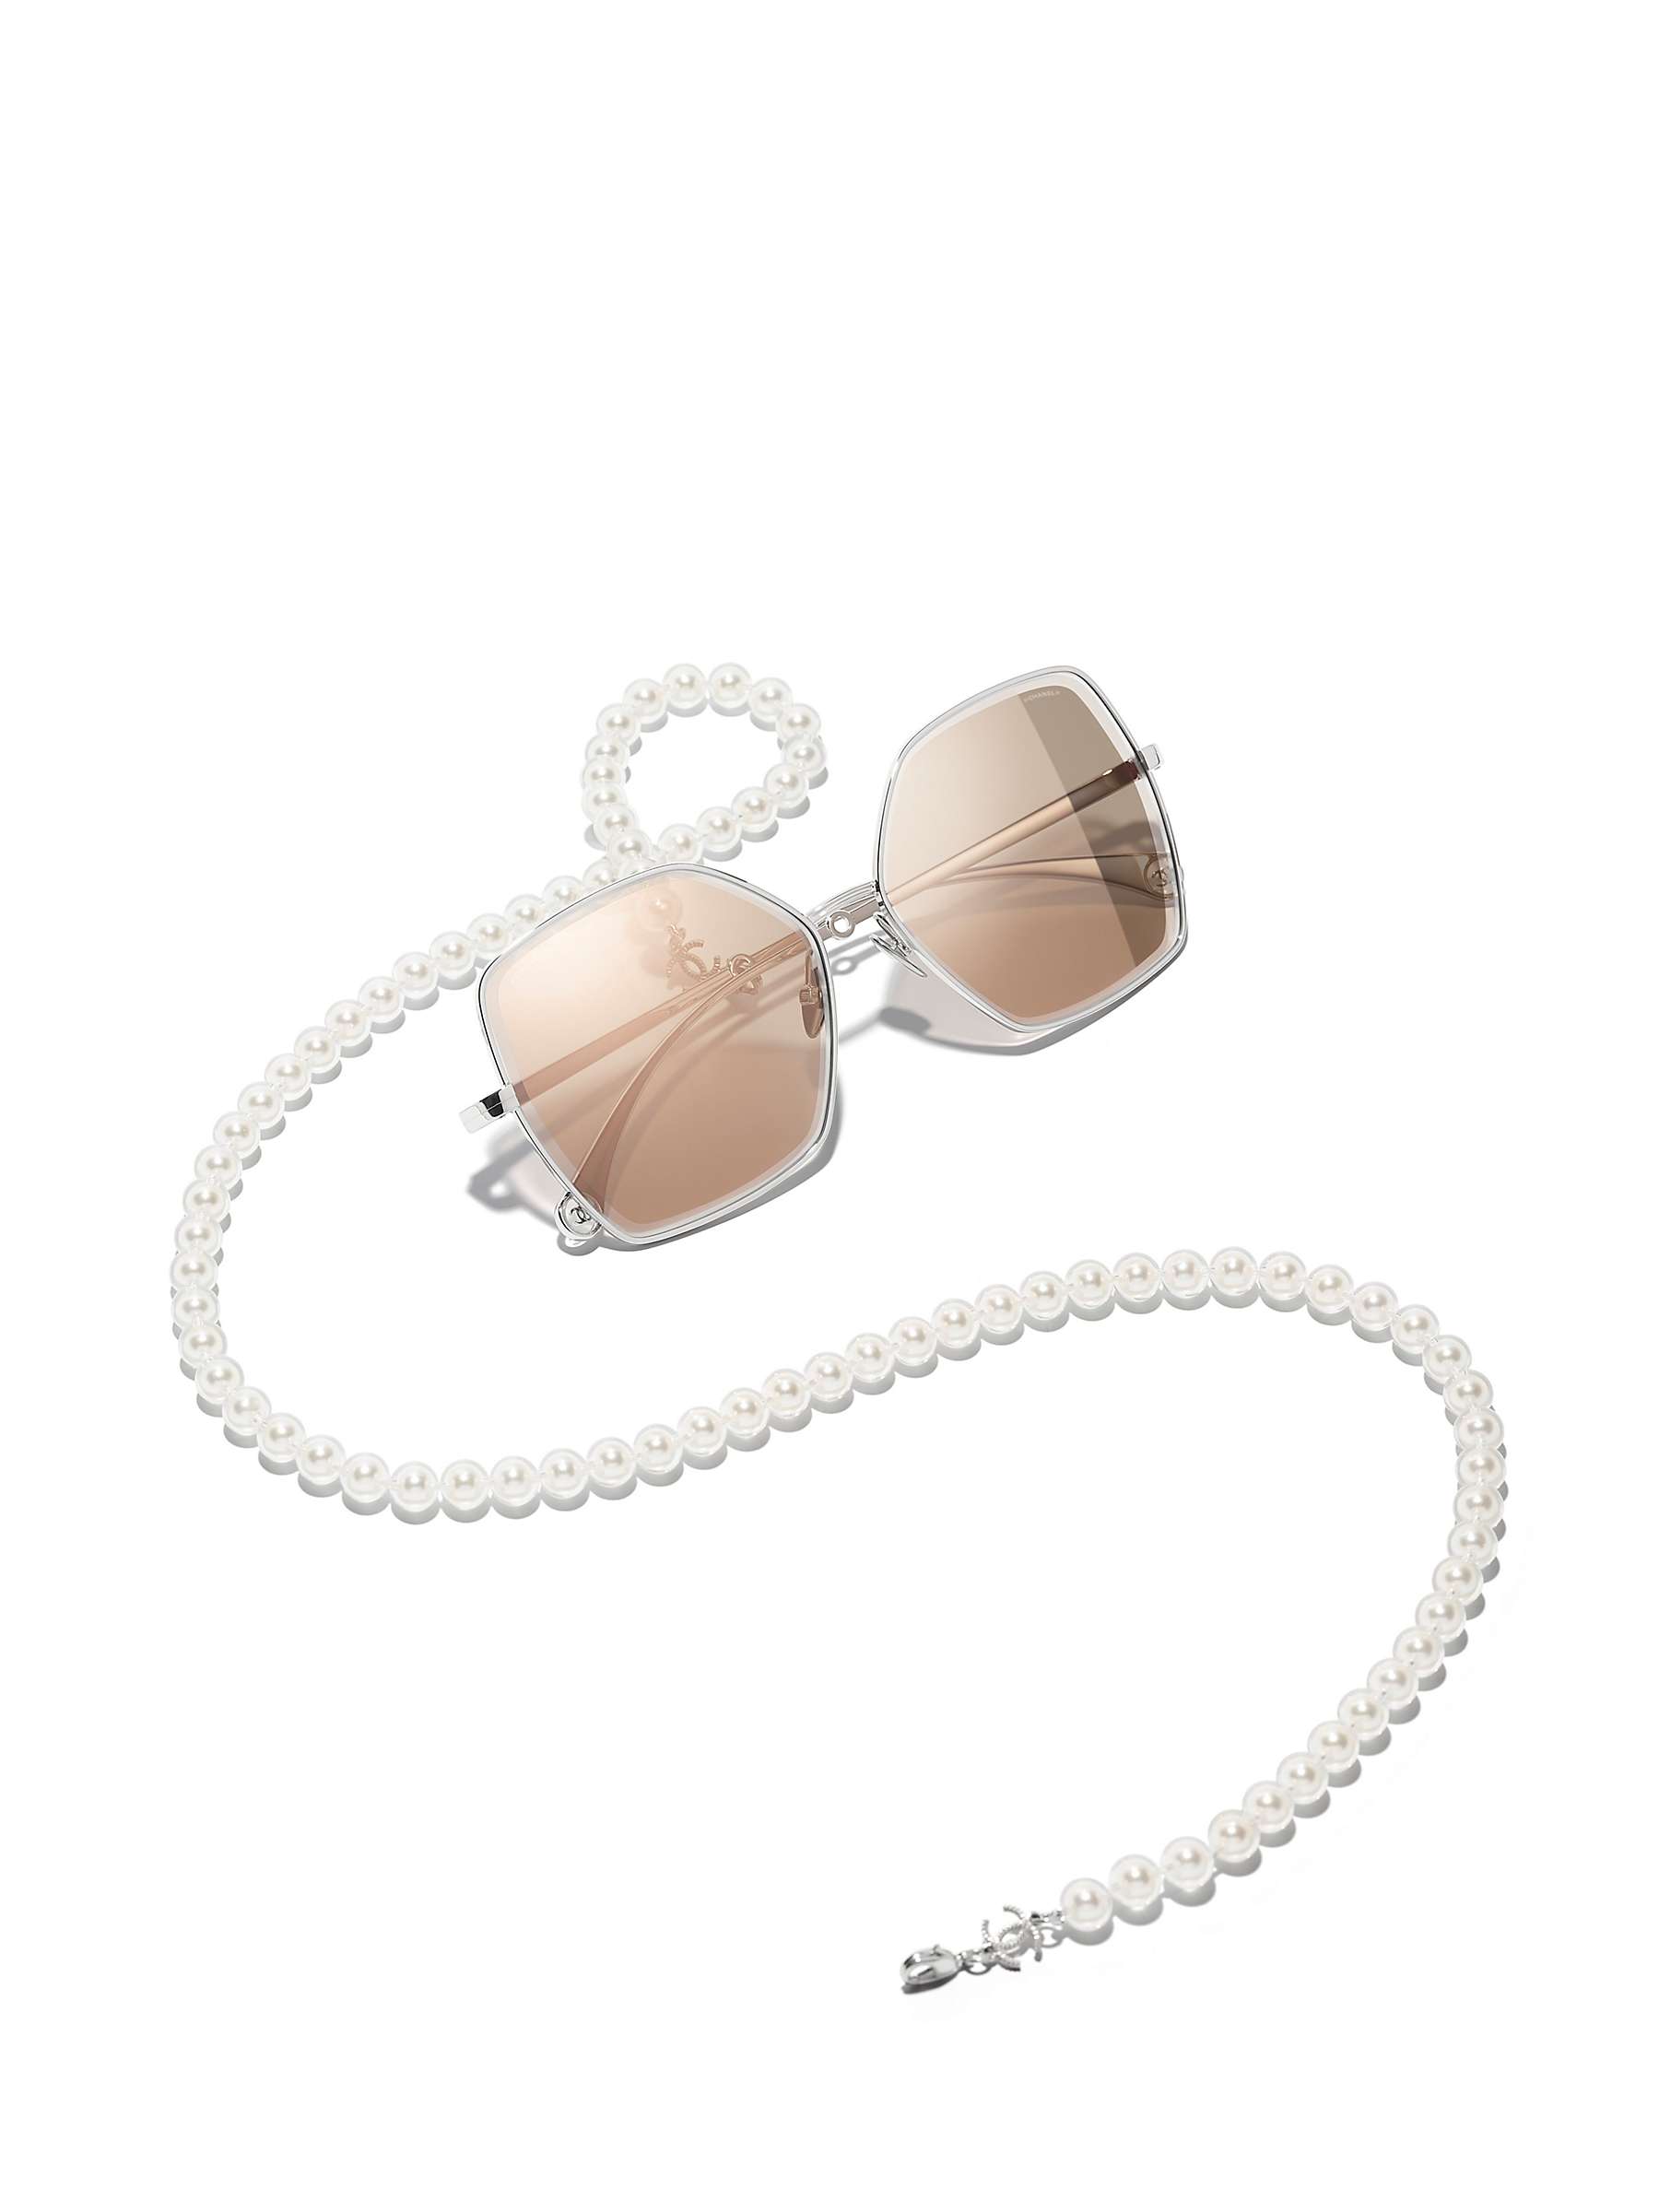 Buy CHANEL Pilot Sunglasses CH4262, Silver/Brown Online at johnlewis.com